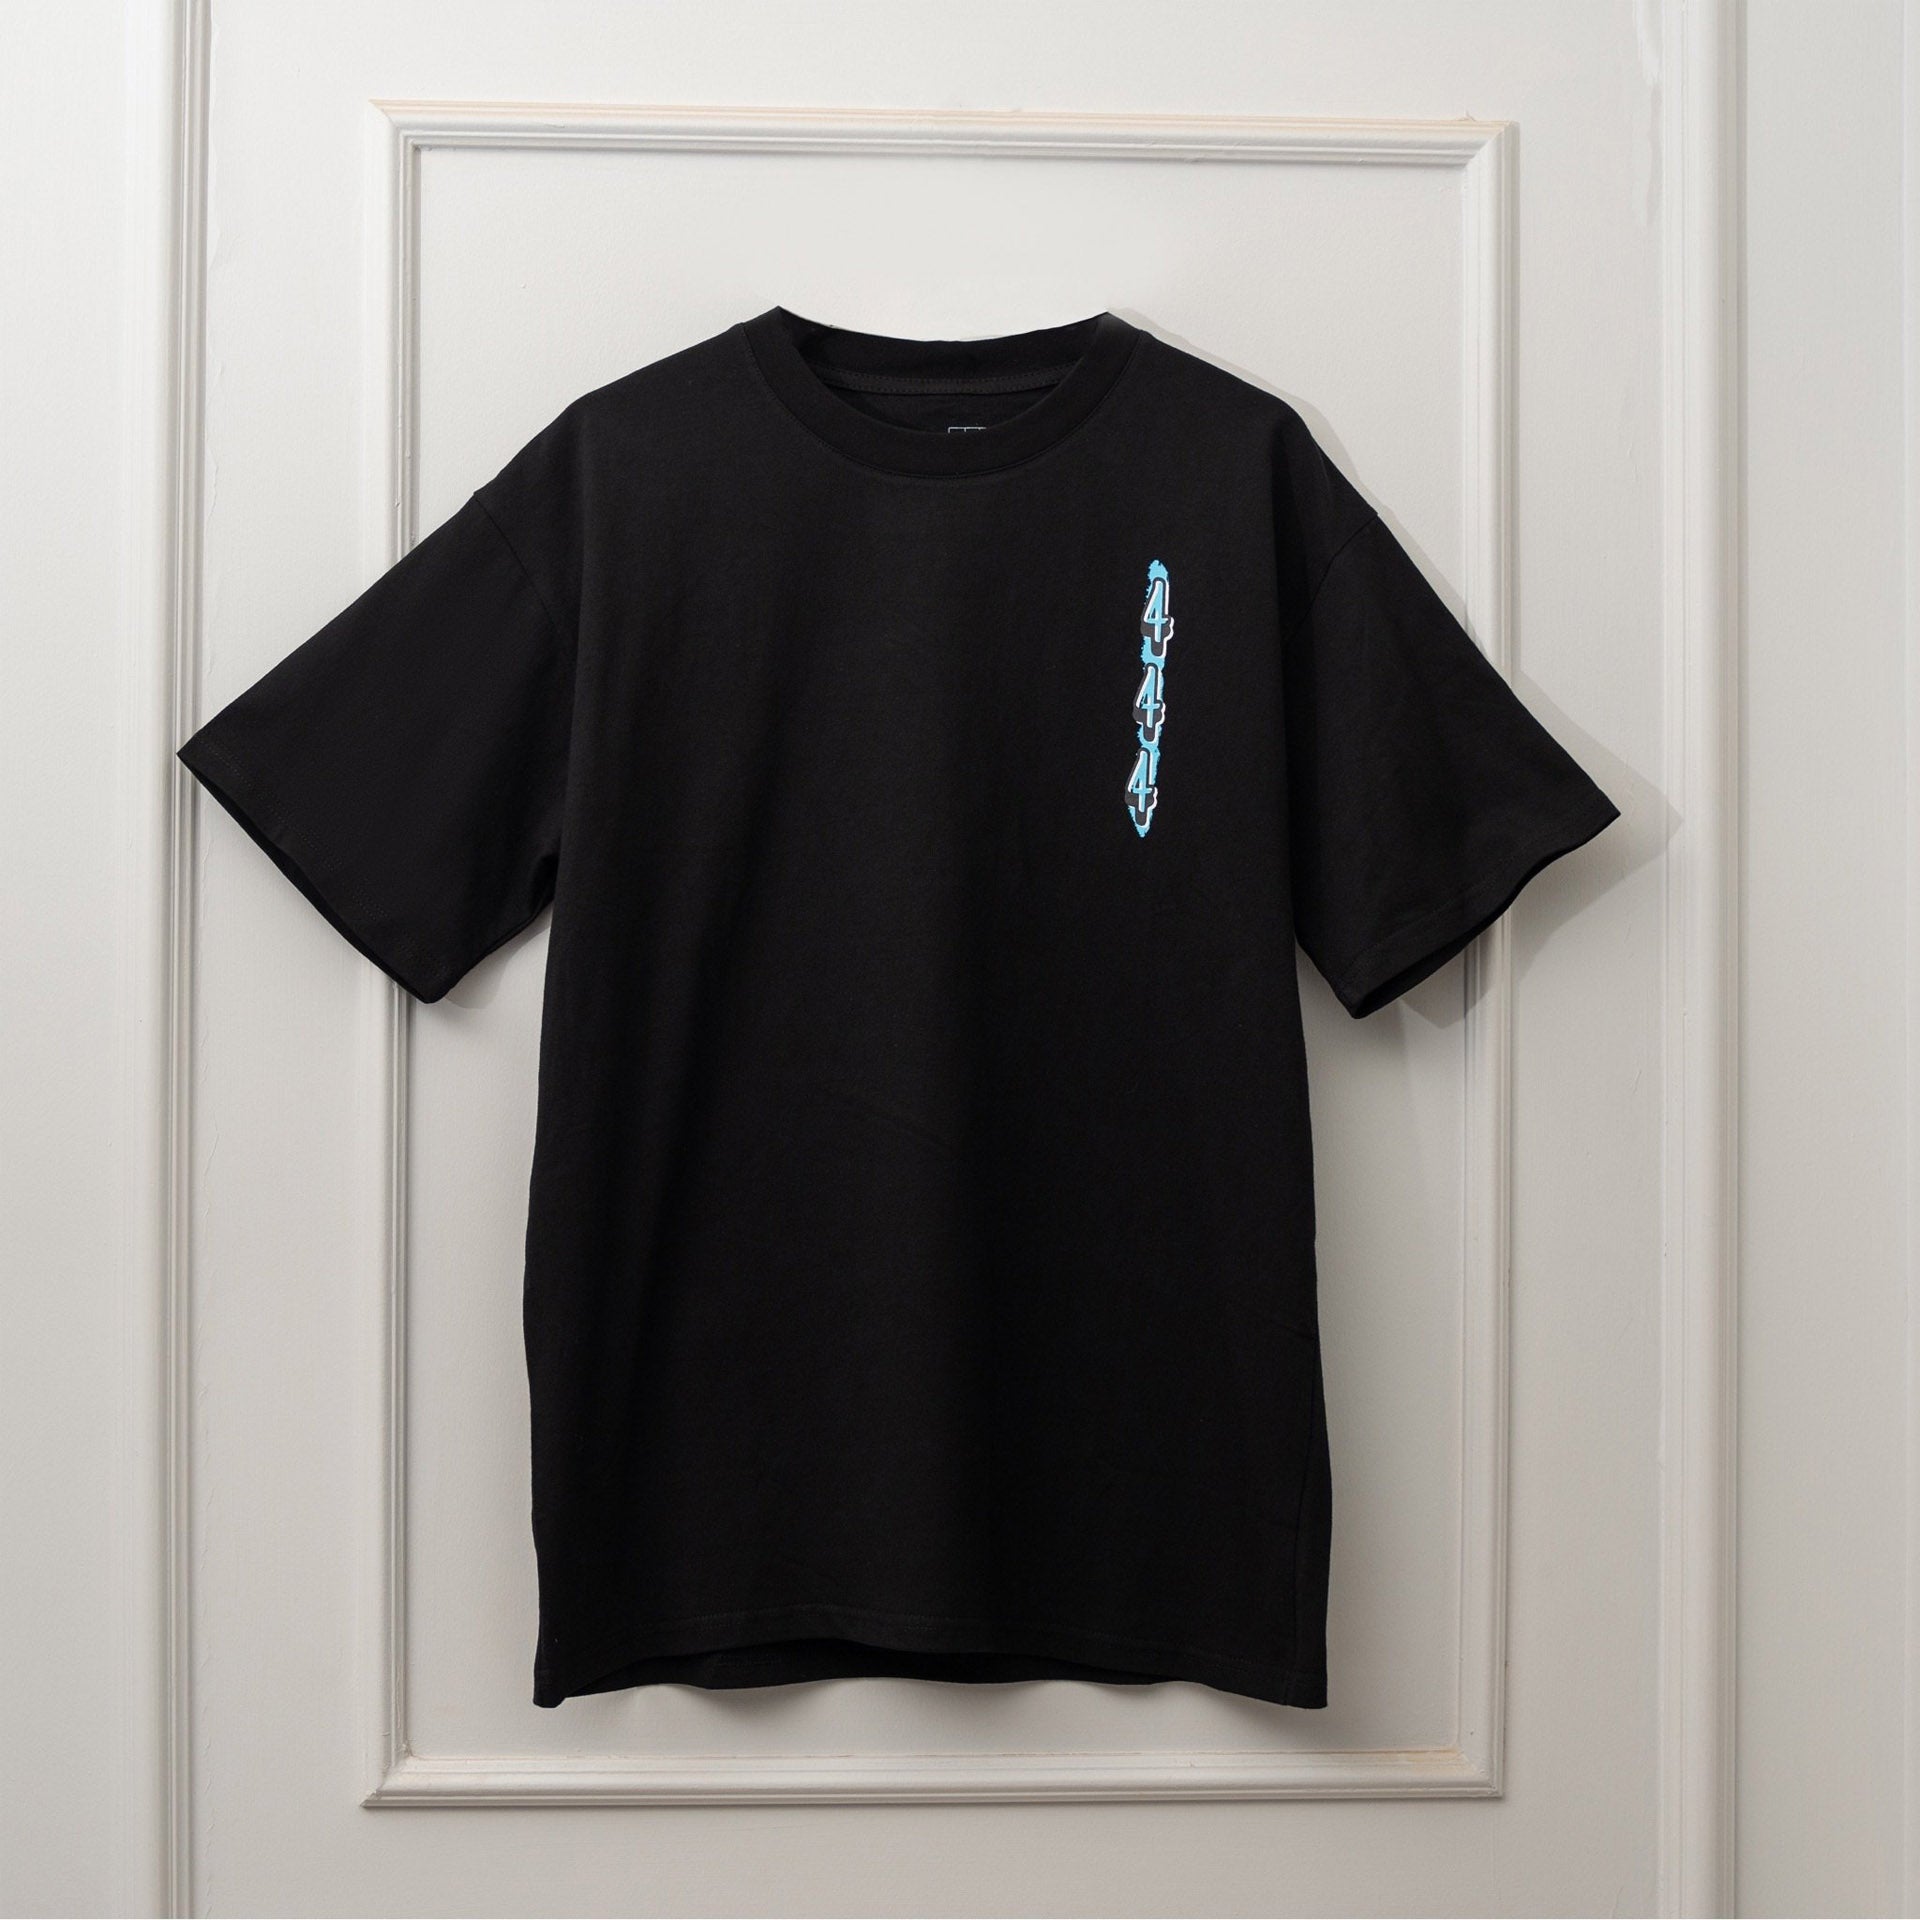 Black T-shirt "No Inspiration" From Triple Four